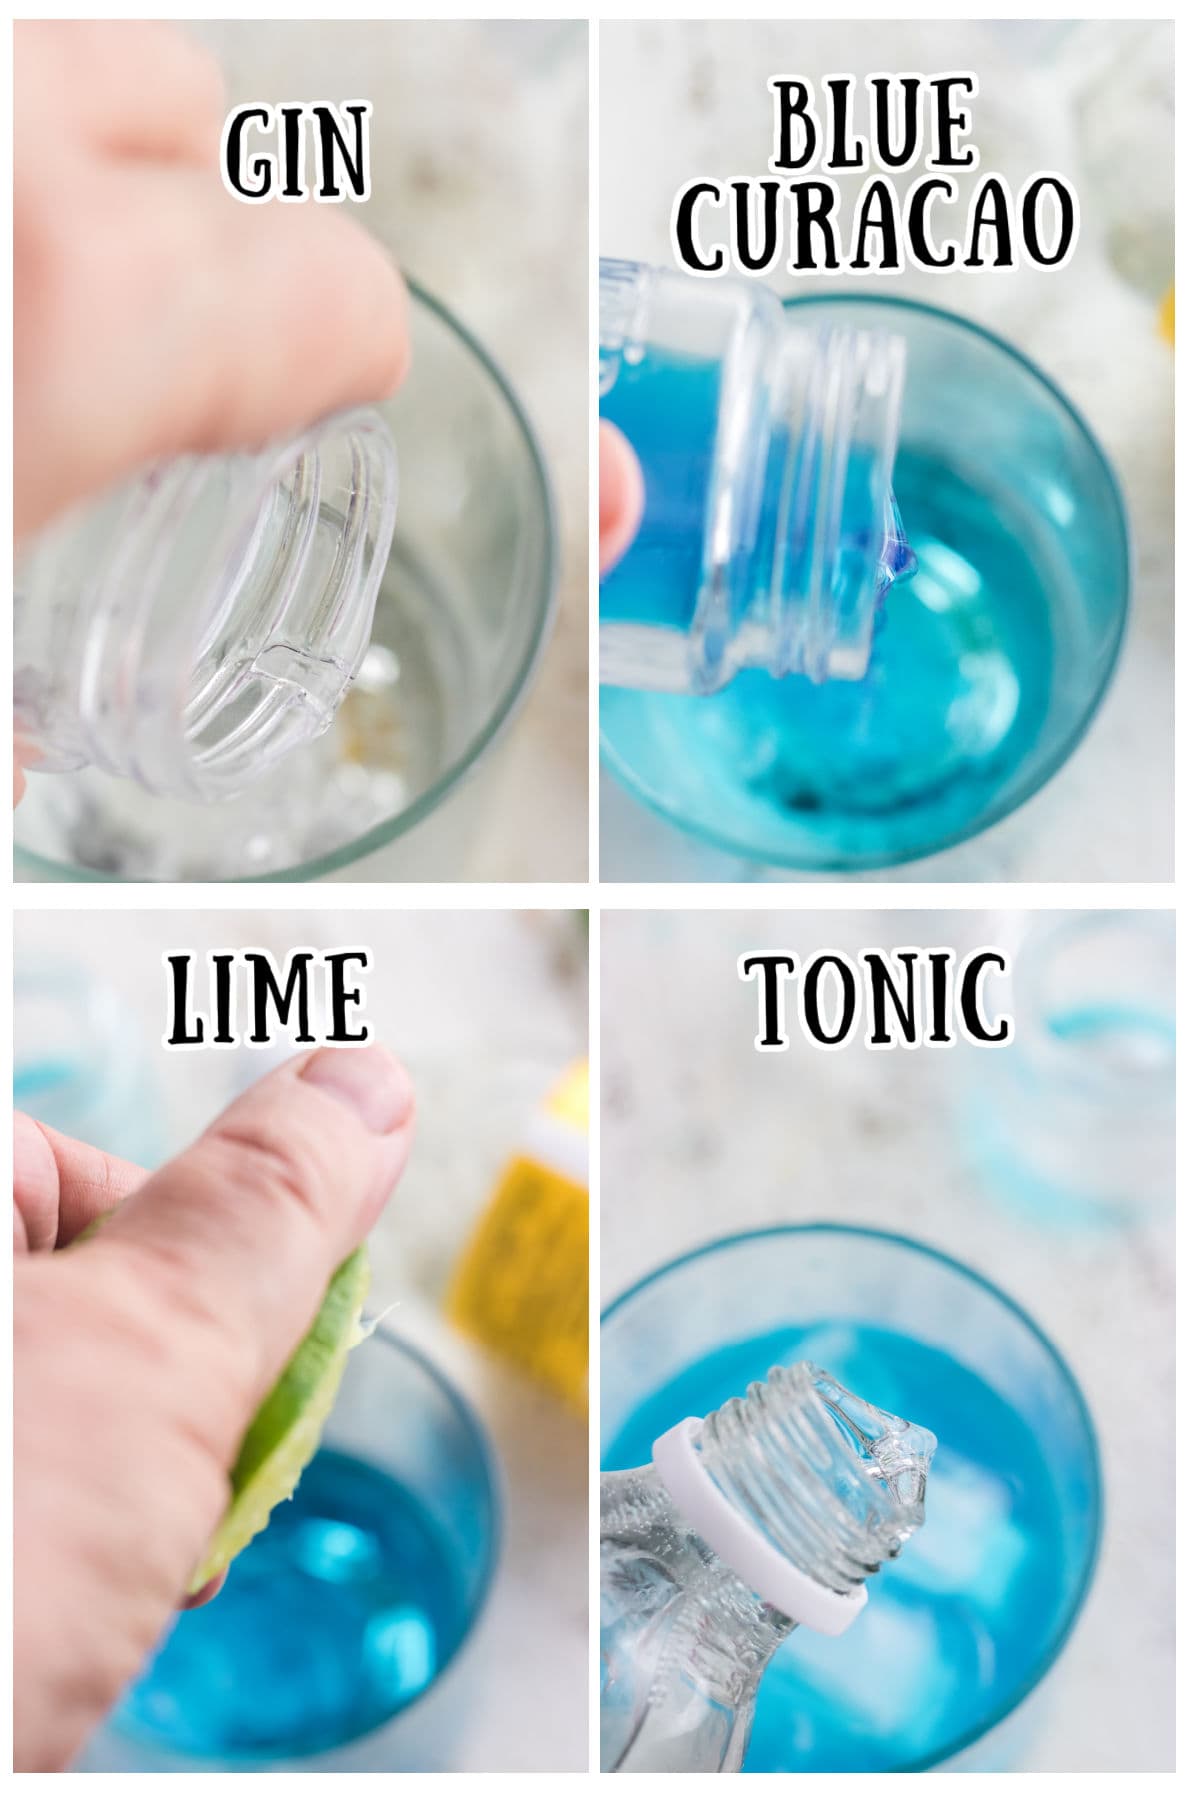 Step by step images showing how to make this gin and tonic.